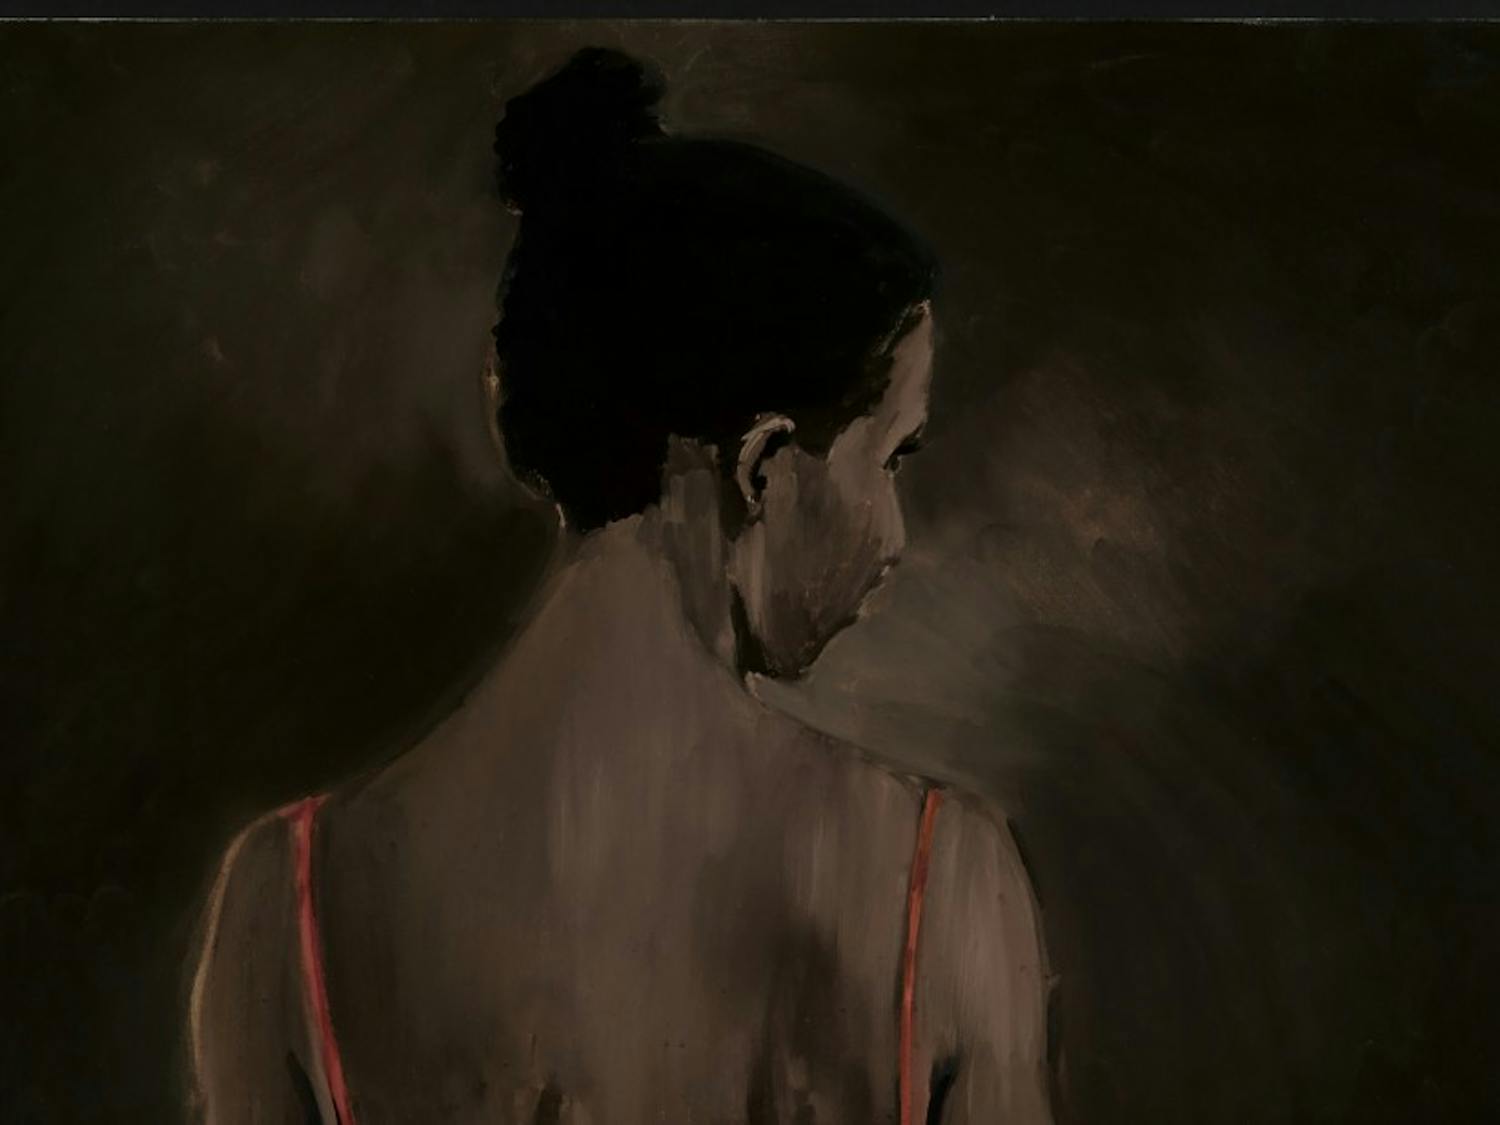 nasher-Lynette Yiadom-Boakye, Places to Love For, 2013.jpg